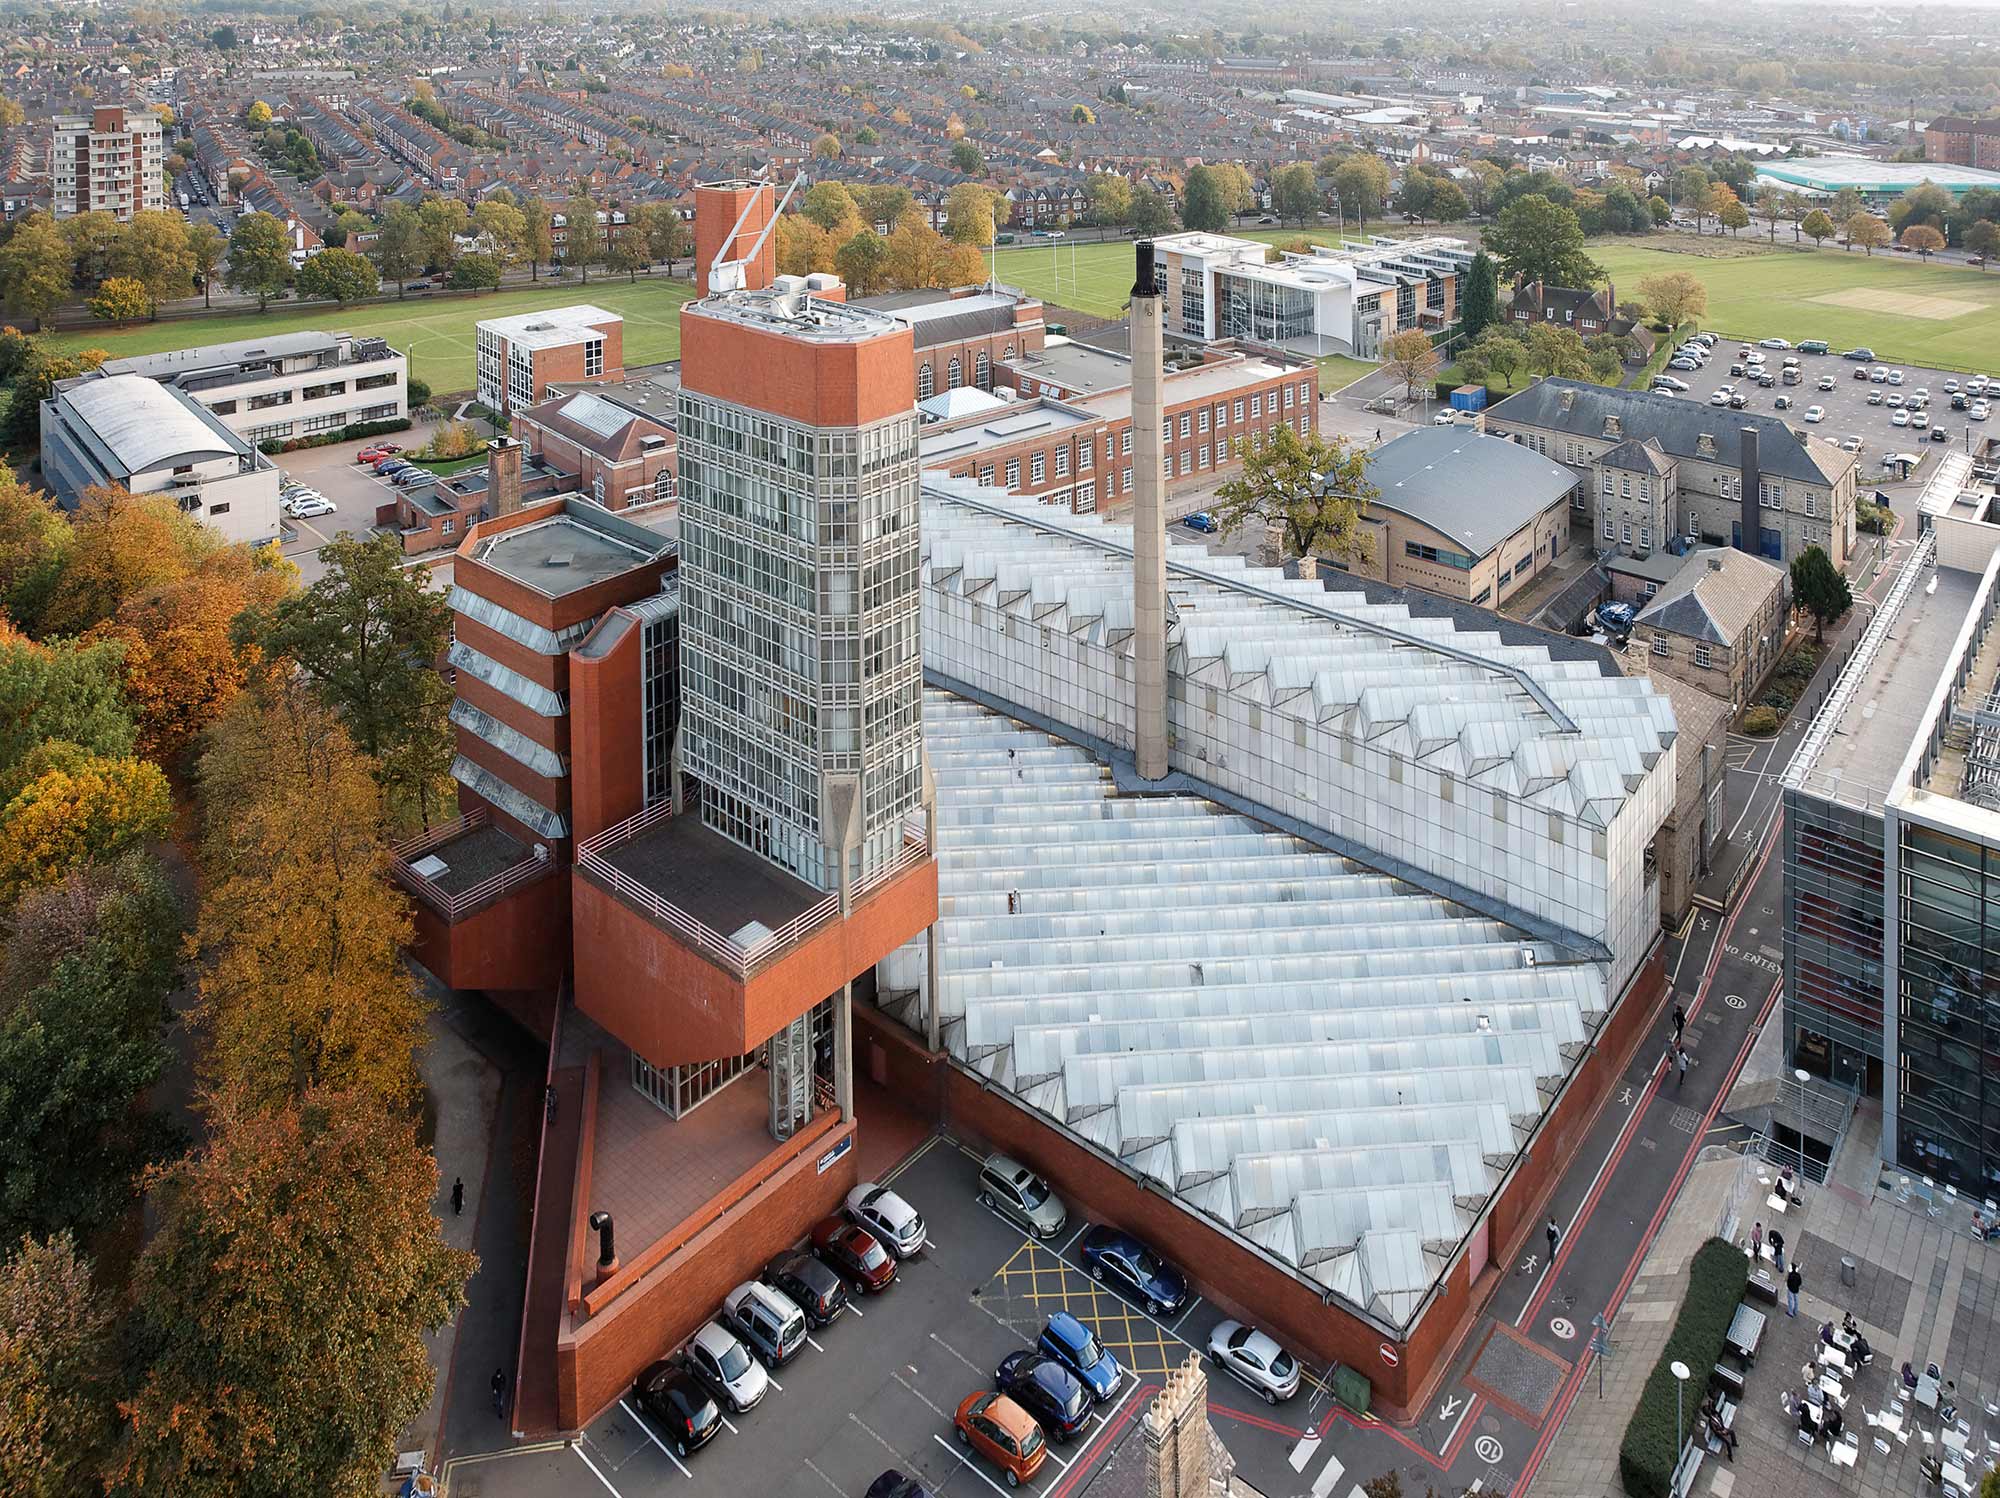 An aerial view of the building as it looks today - University of Leicester